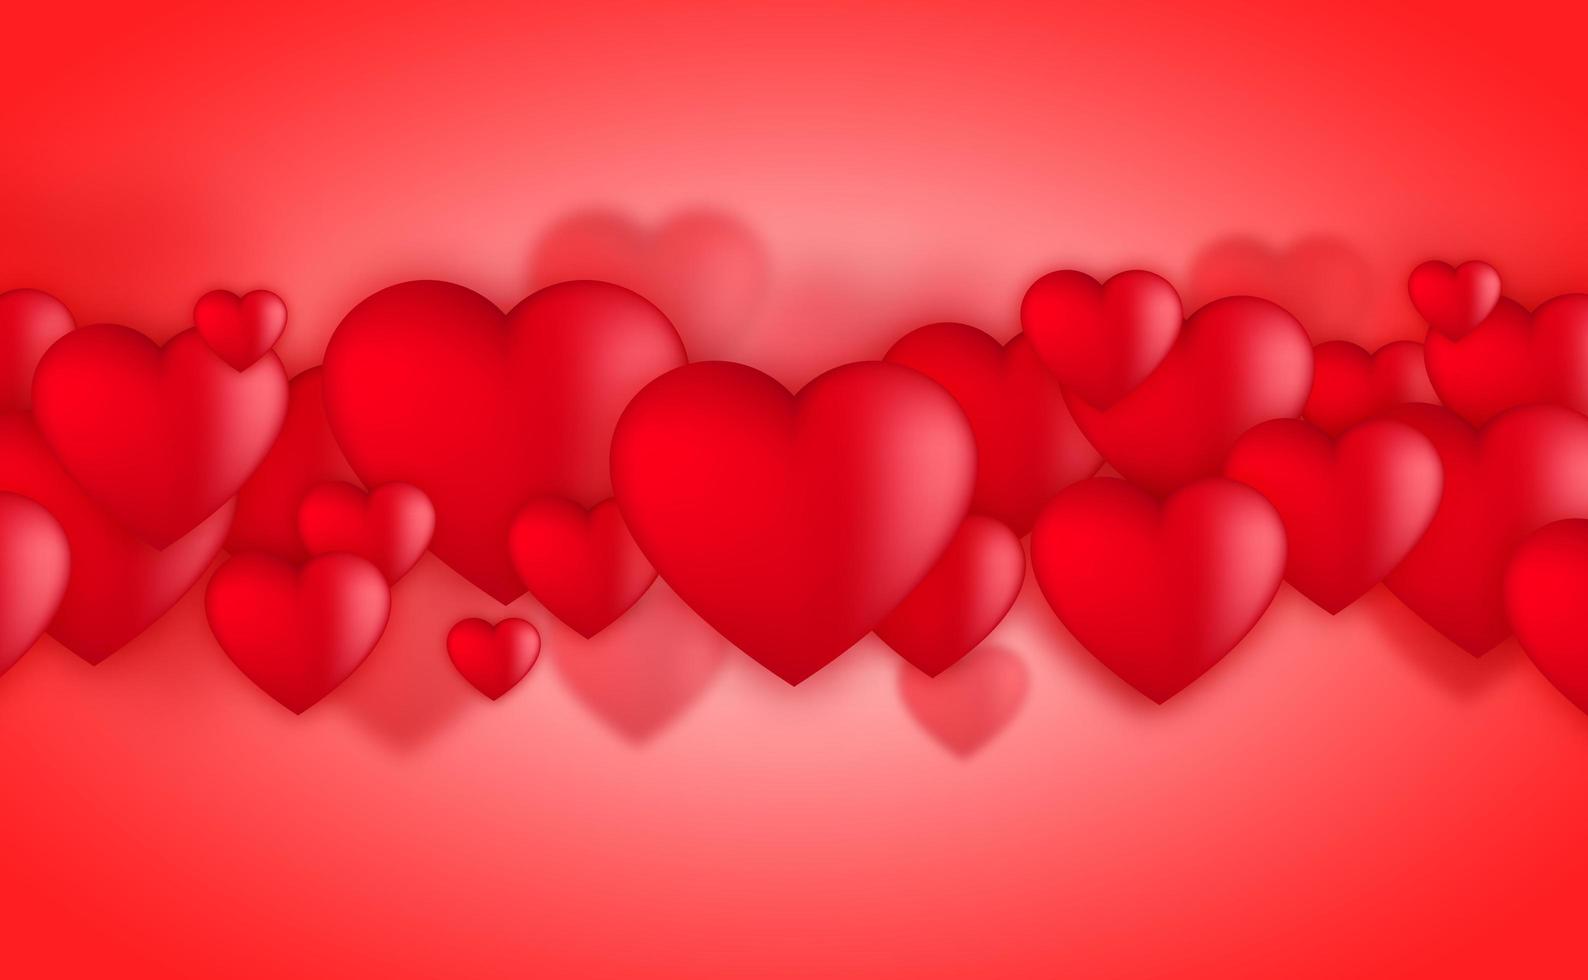 Valentines day hearts, Love balloons on red background vektor